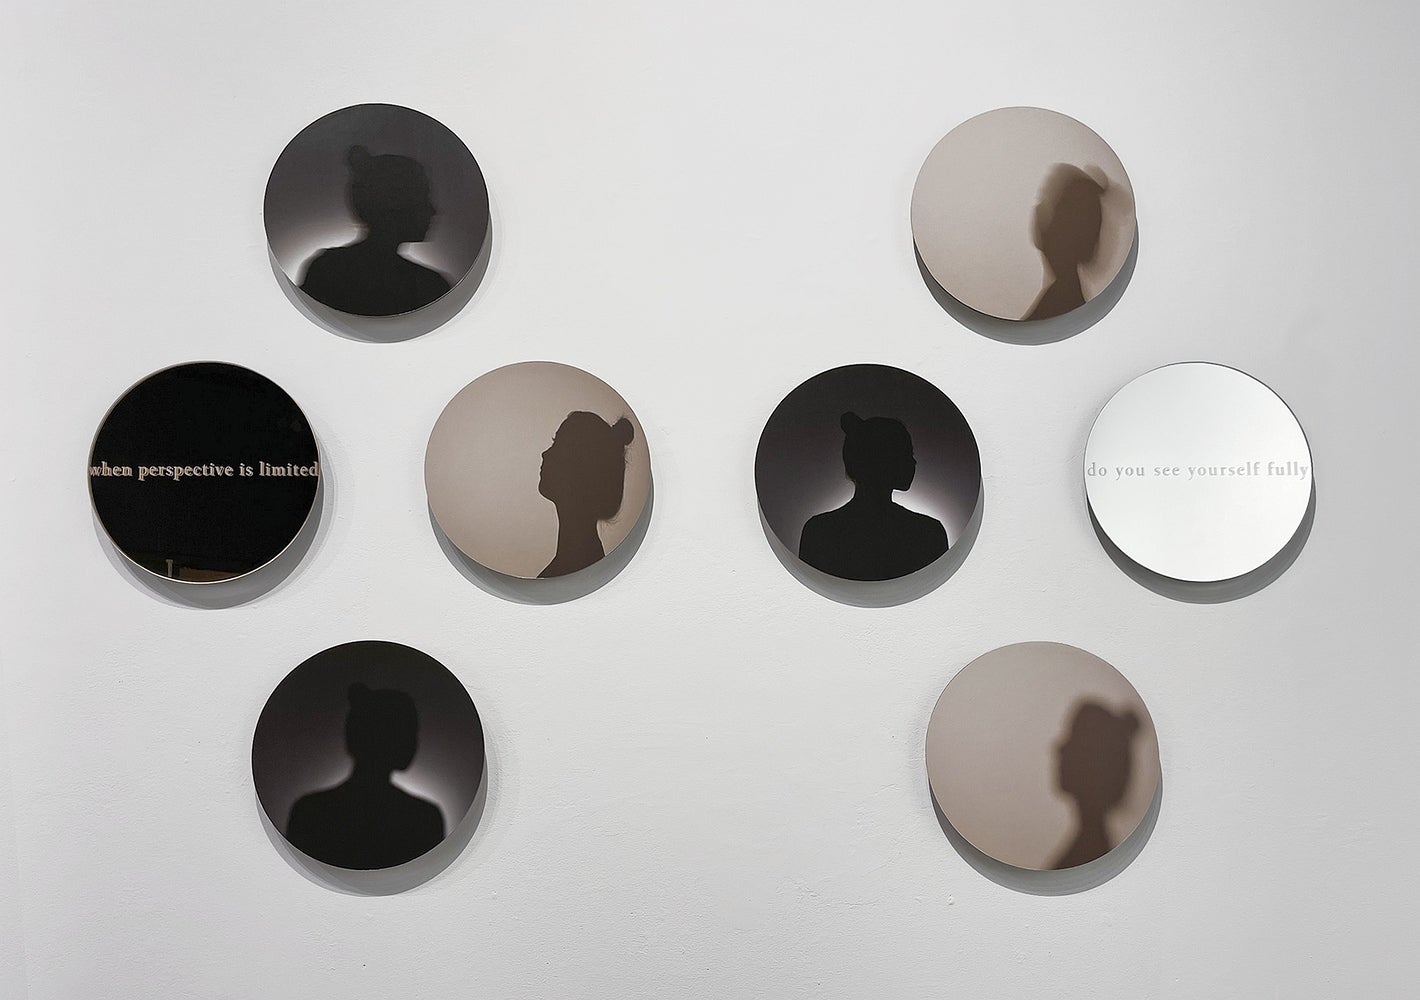 Art installation of 8 circular glass works. 6 show a woman's portrait in silhouette, 2 show text "when perspective is limited" a